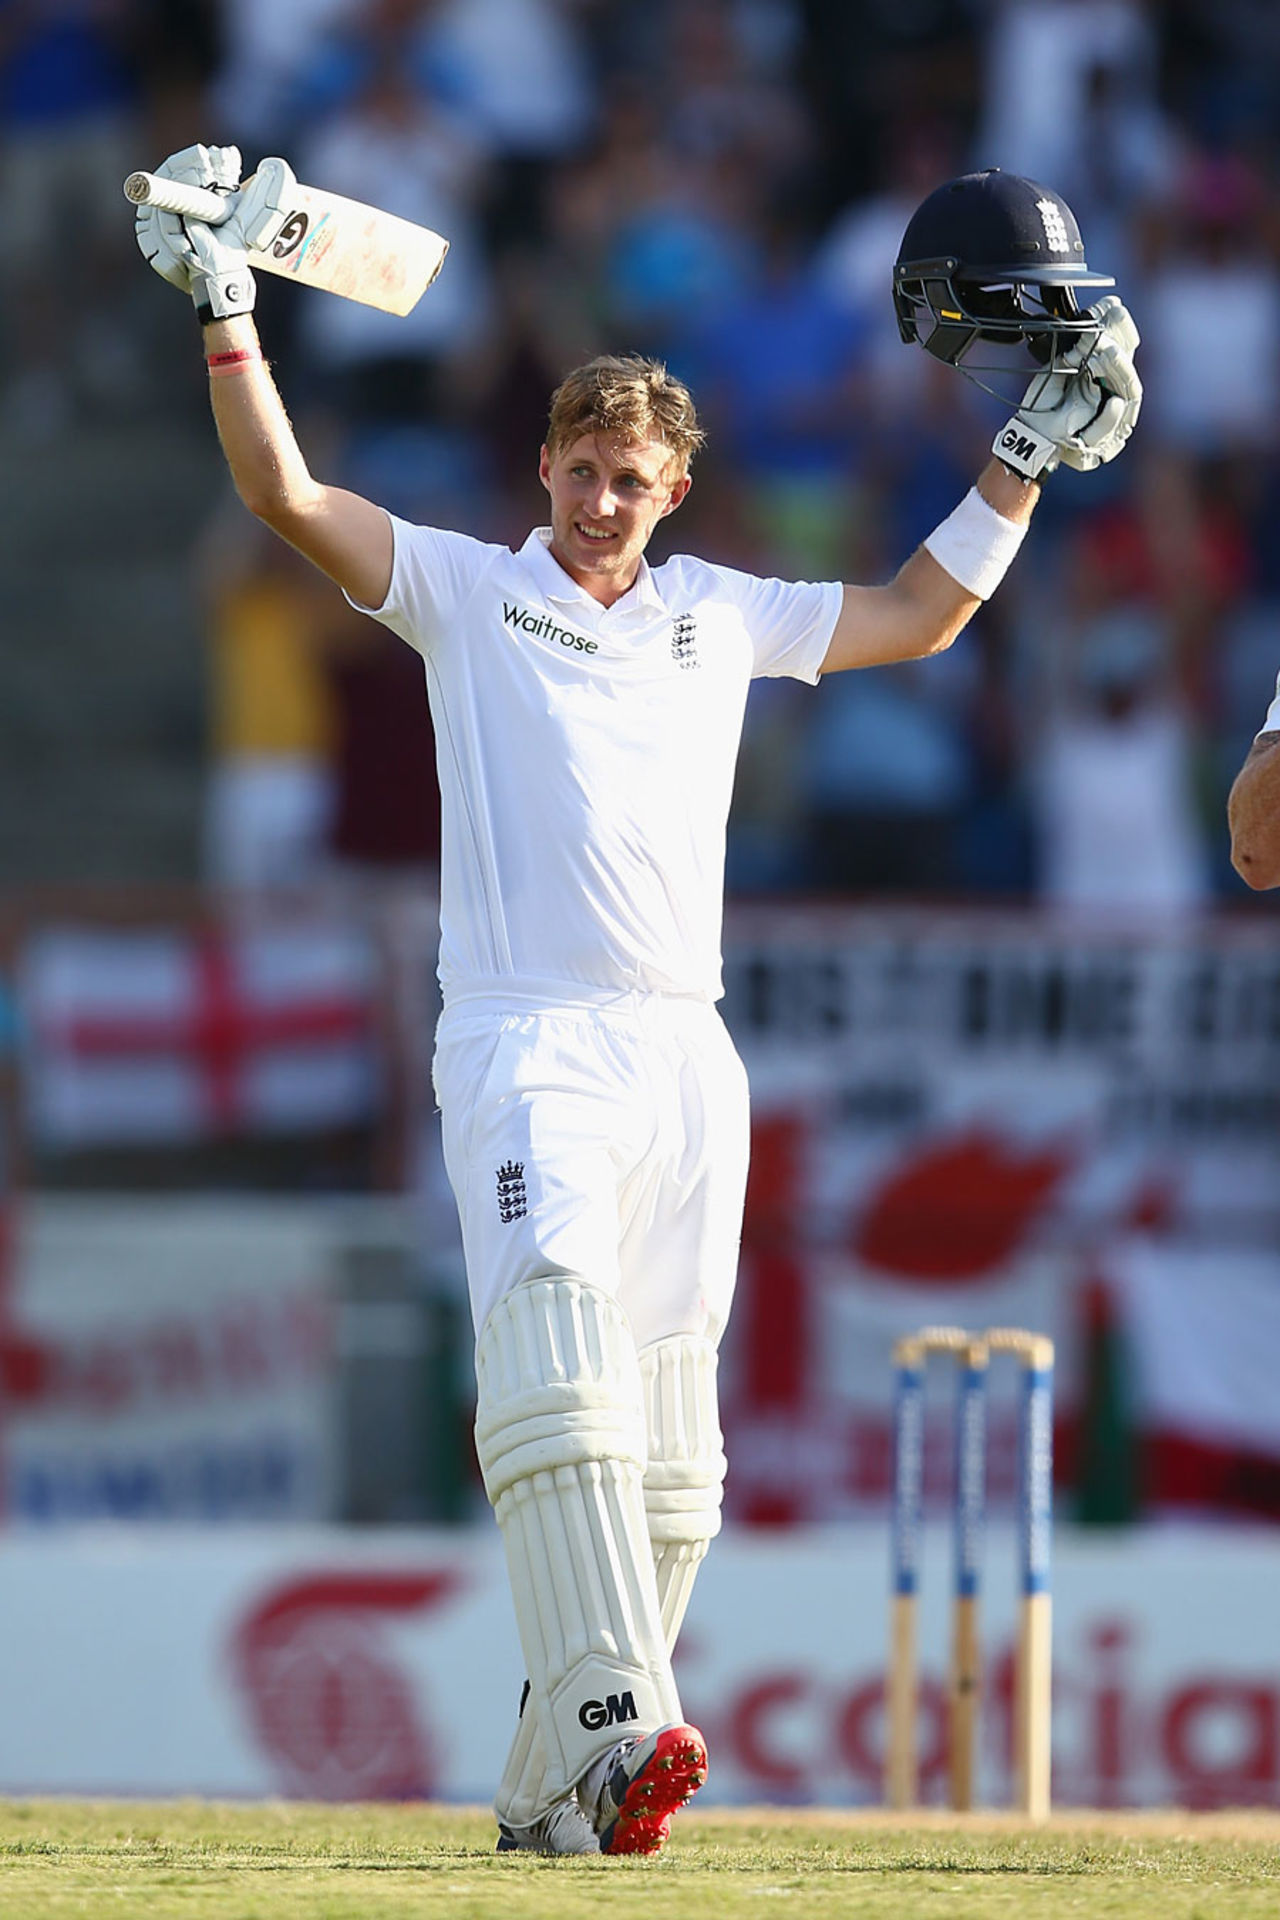 Joe Root reached his sixth Test hundred, and first away from home, West Indies v England, 2nd Test, St George's, 3rd day, April 23, 2015